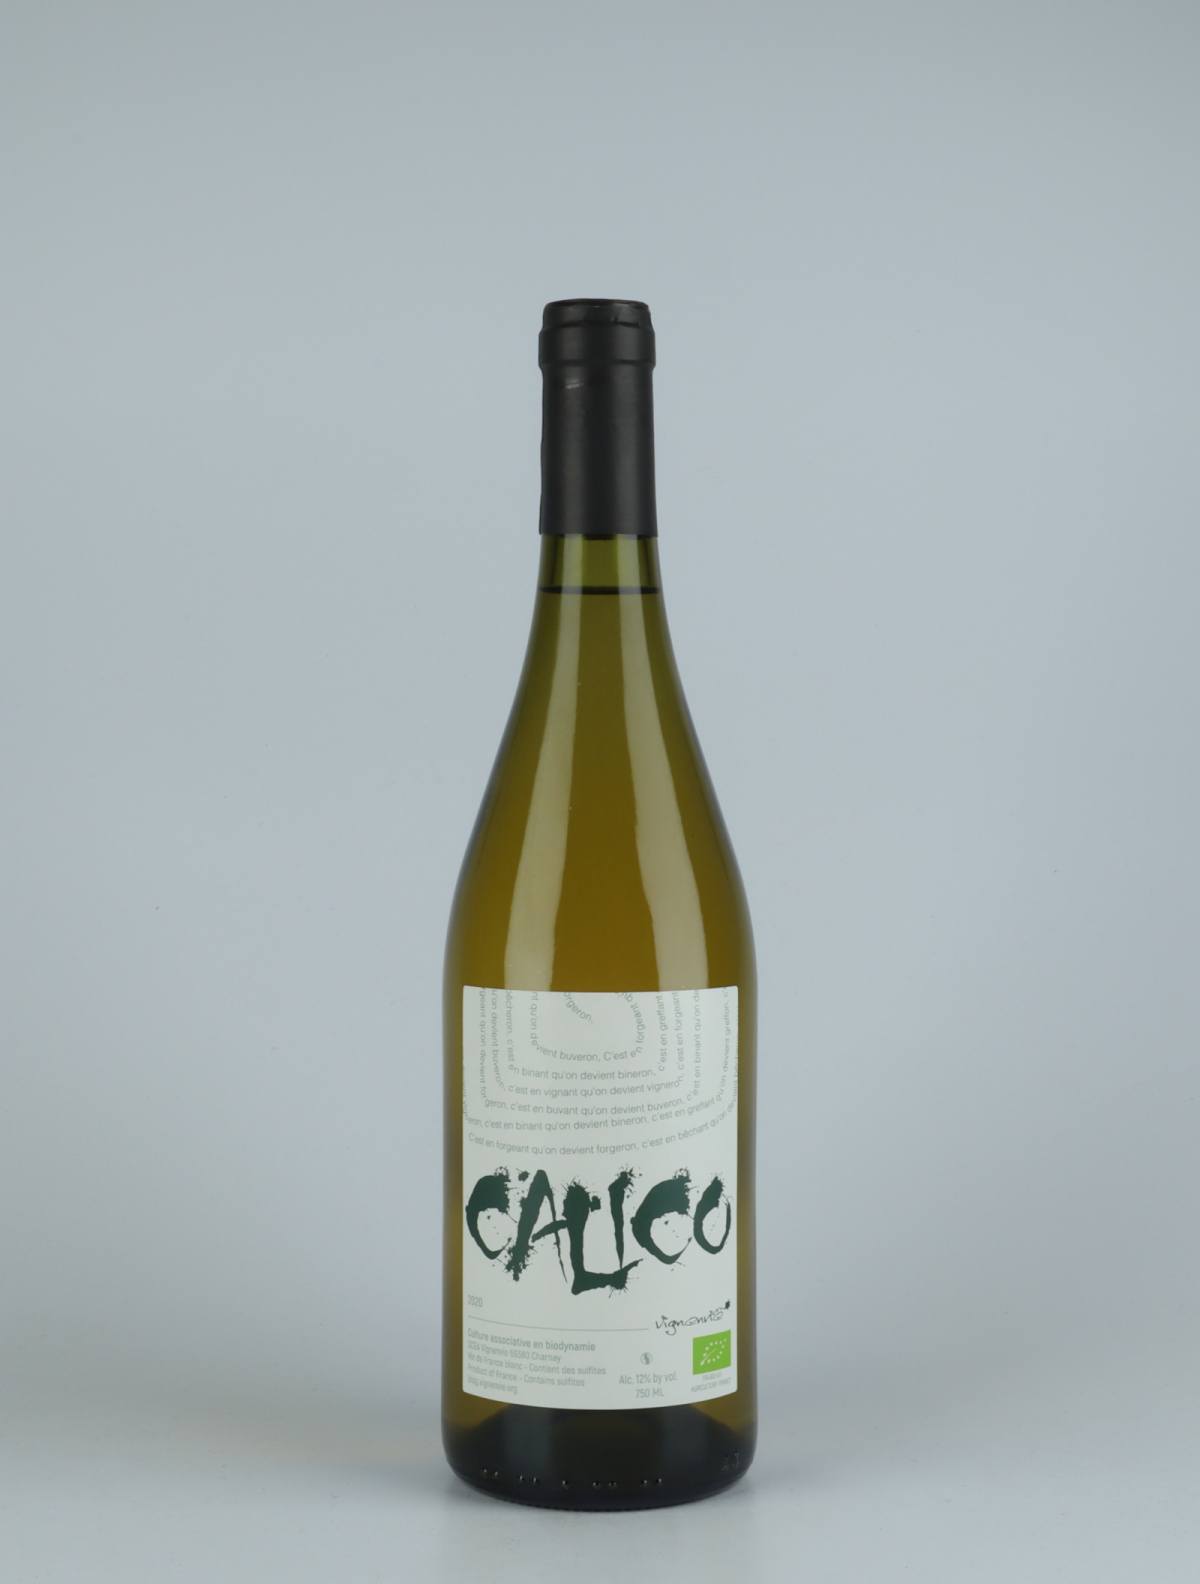 A bottle 2020 Calico White wine from Vignenvie, Beaujolais in France